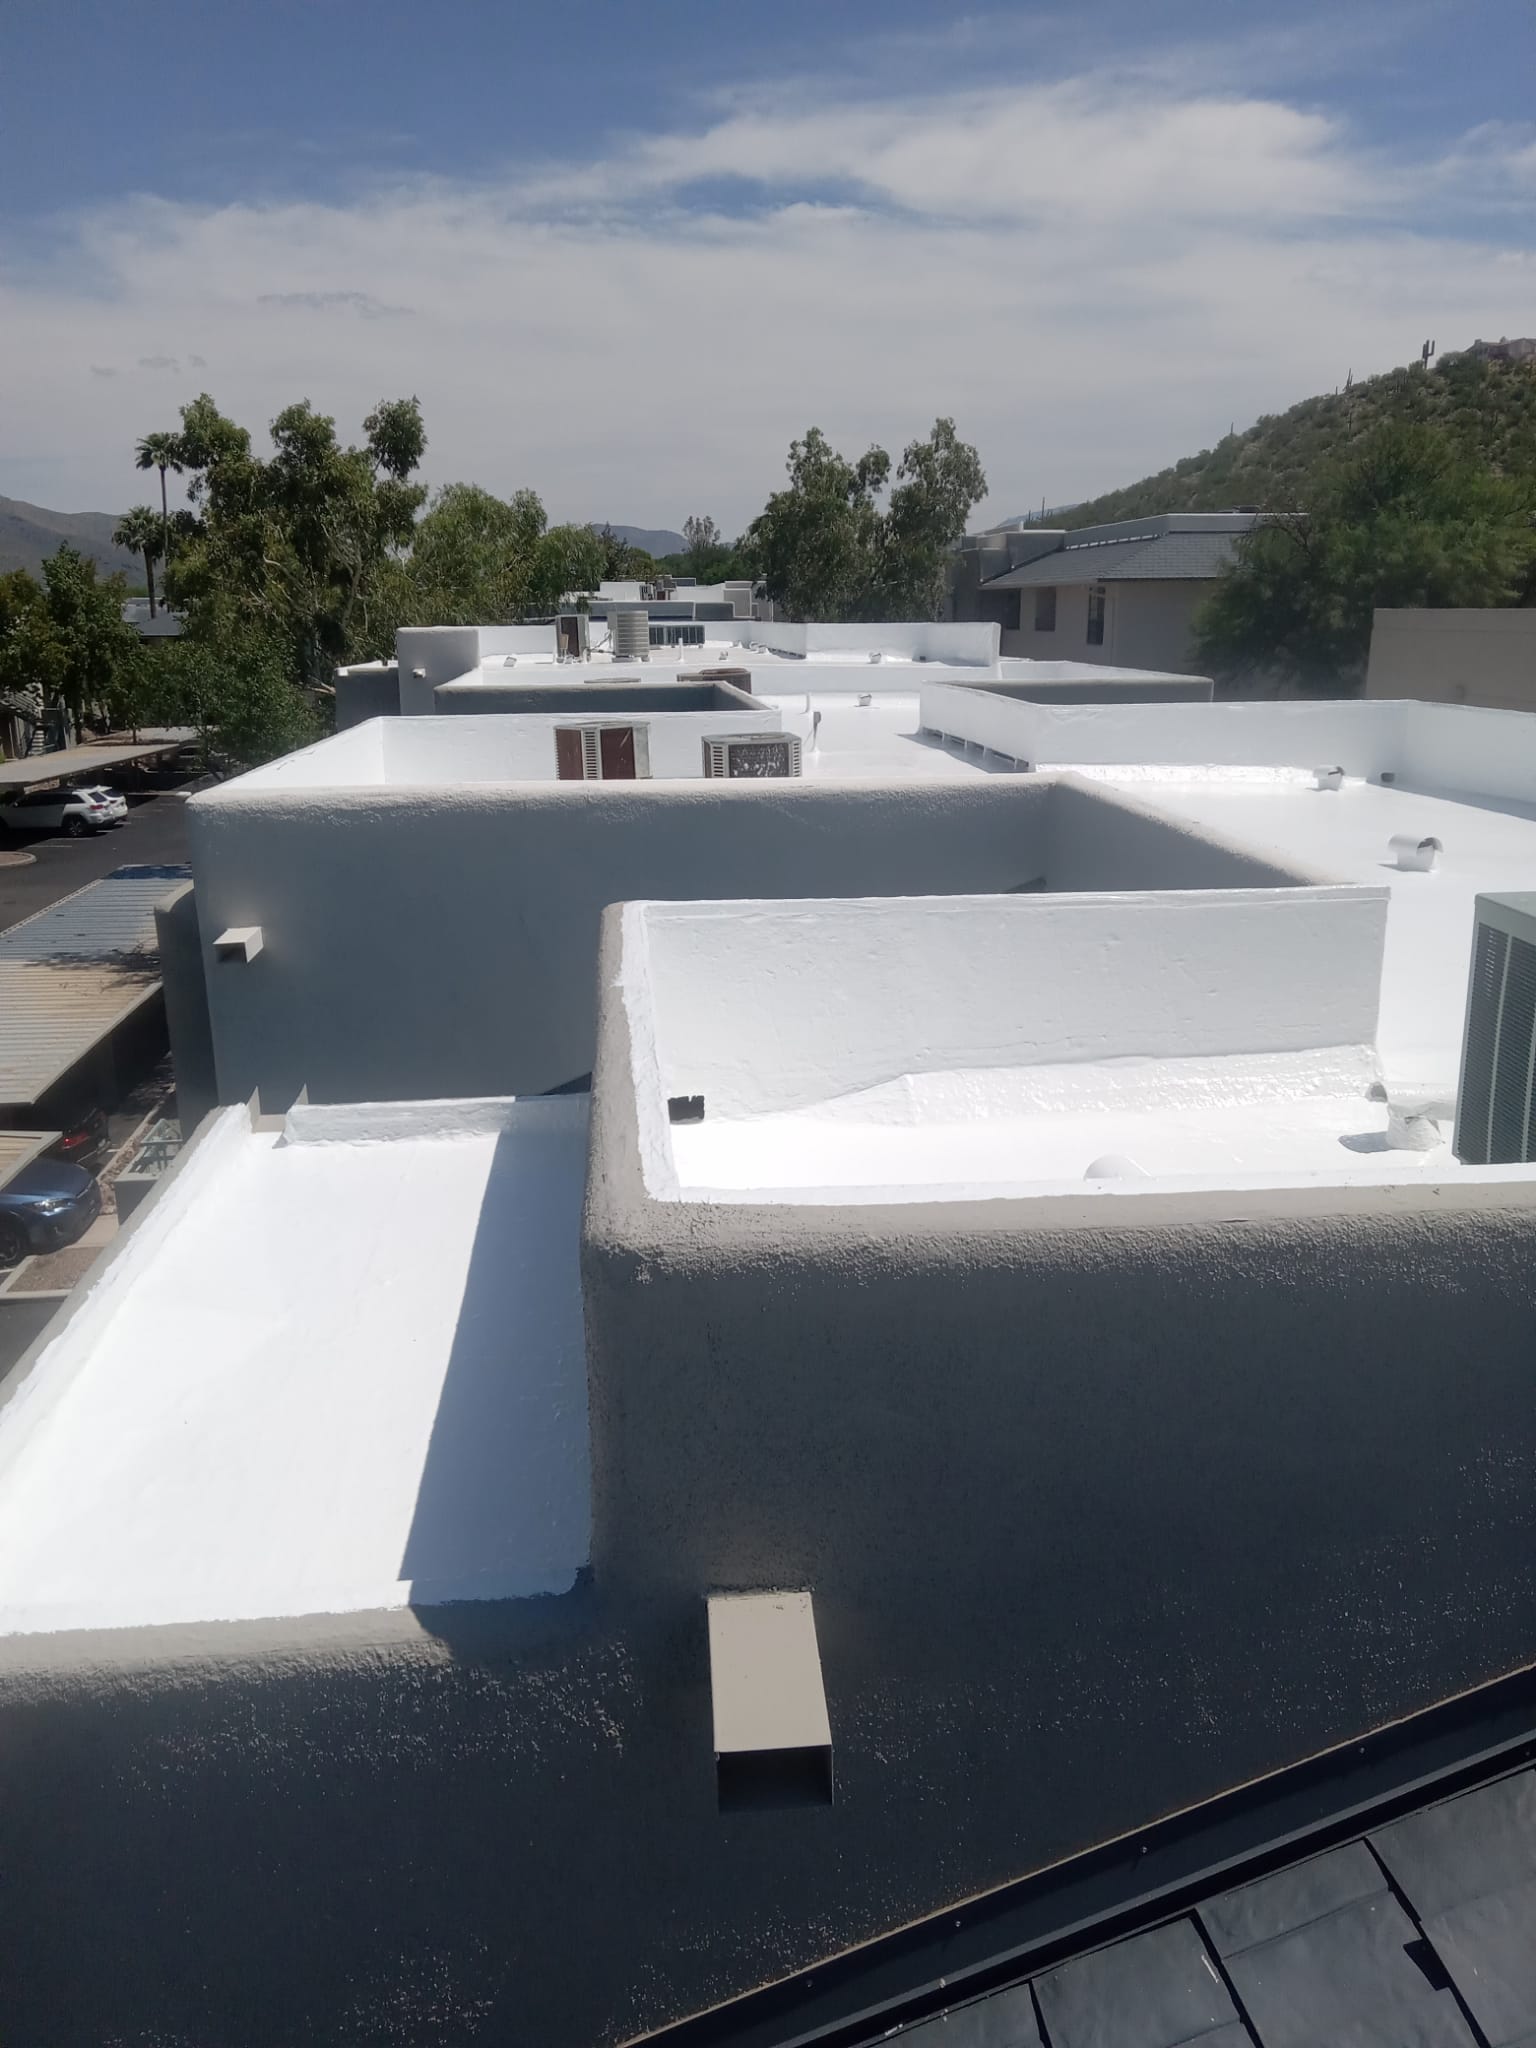 Fresh spray foam coating shining under the sunlight on a Tempe building's rooftop.